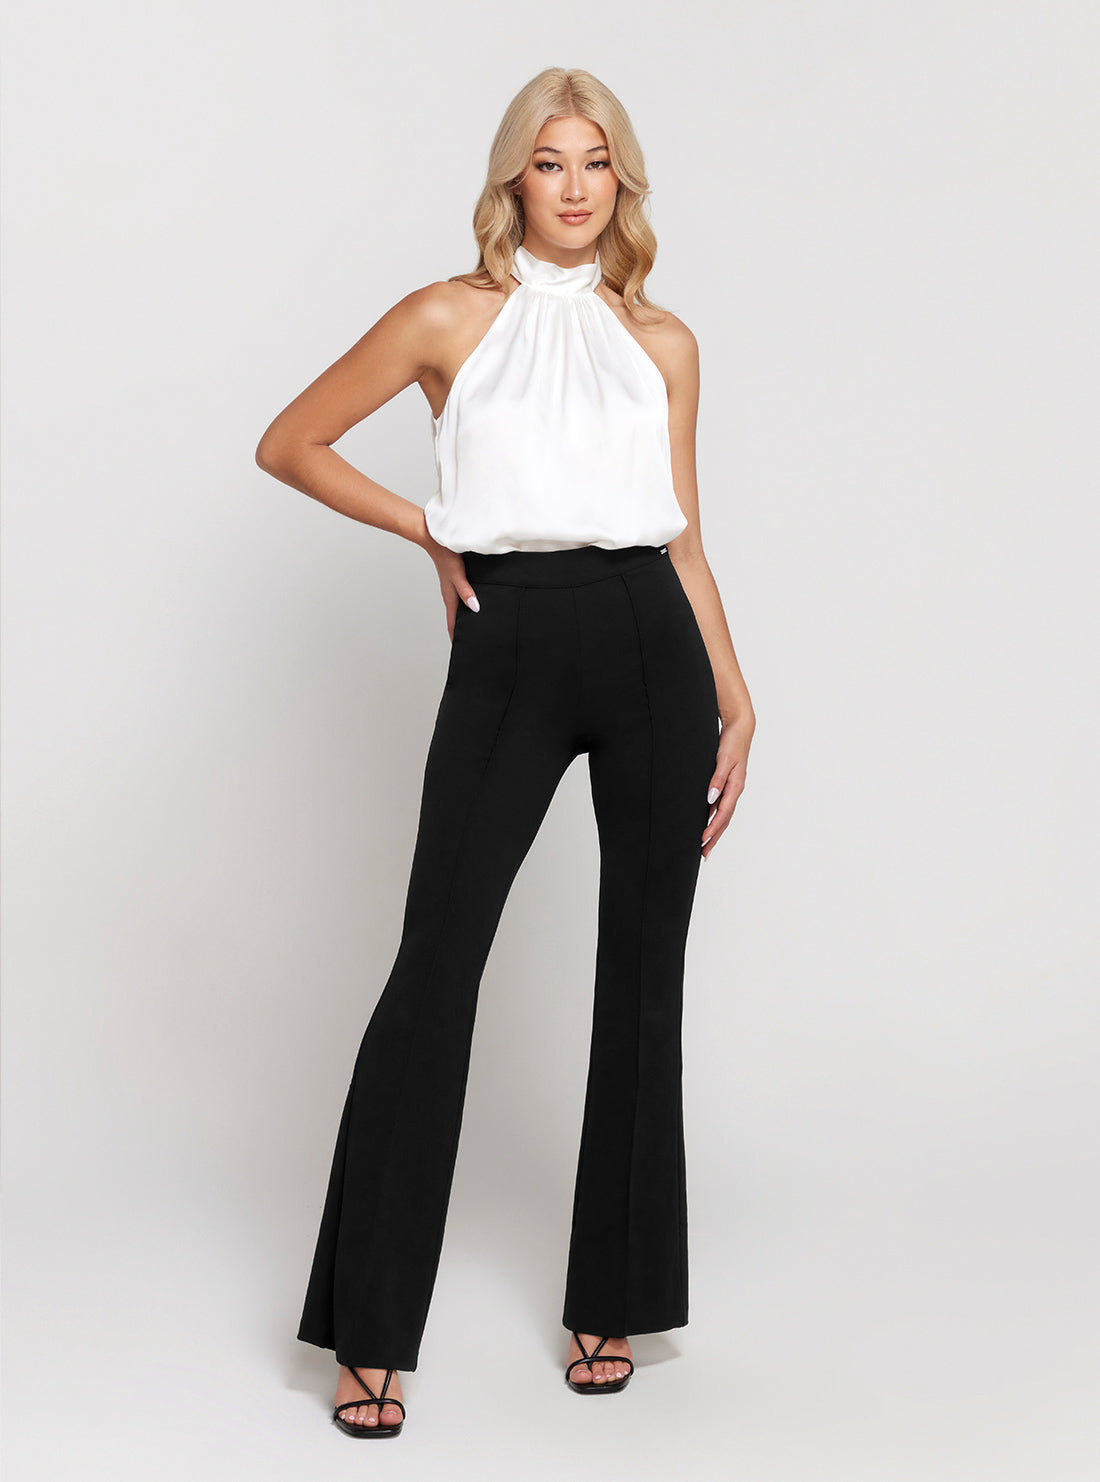 GUESS Black Flared Evelina Pants full view